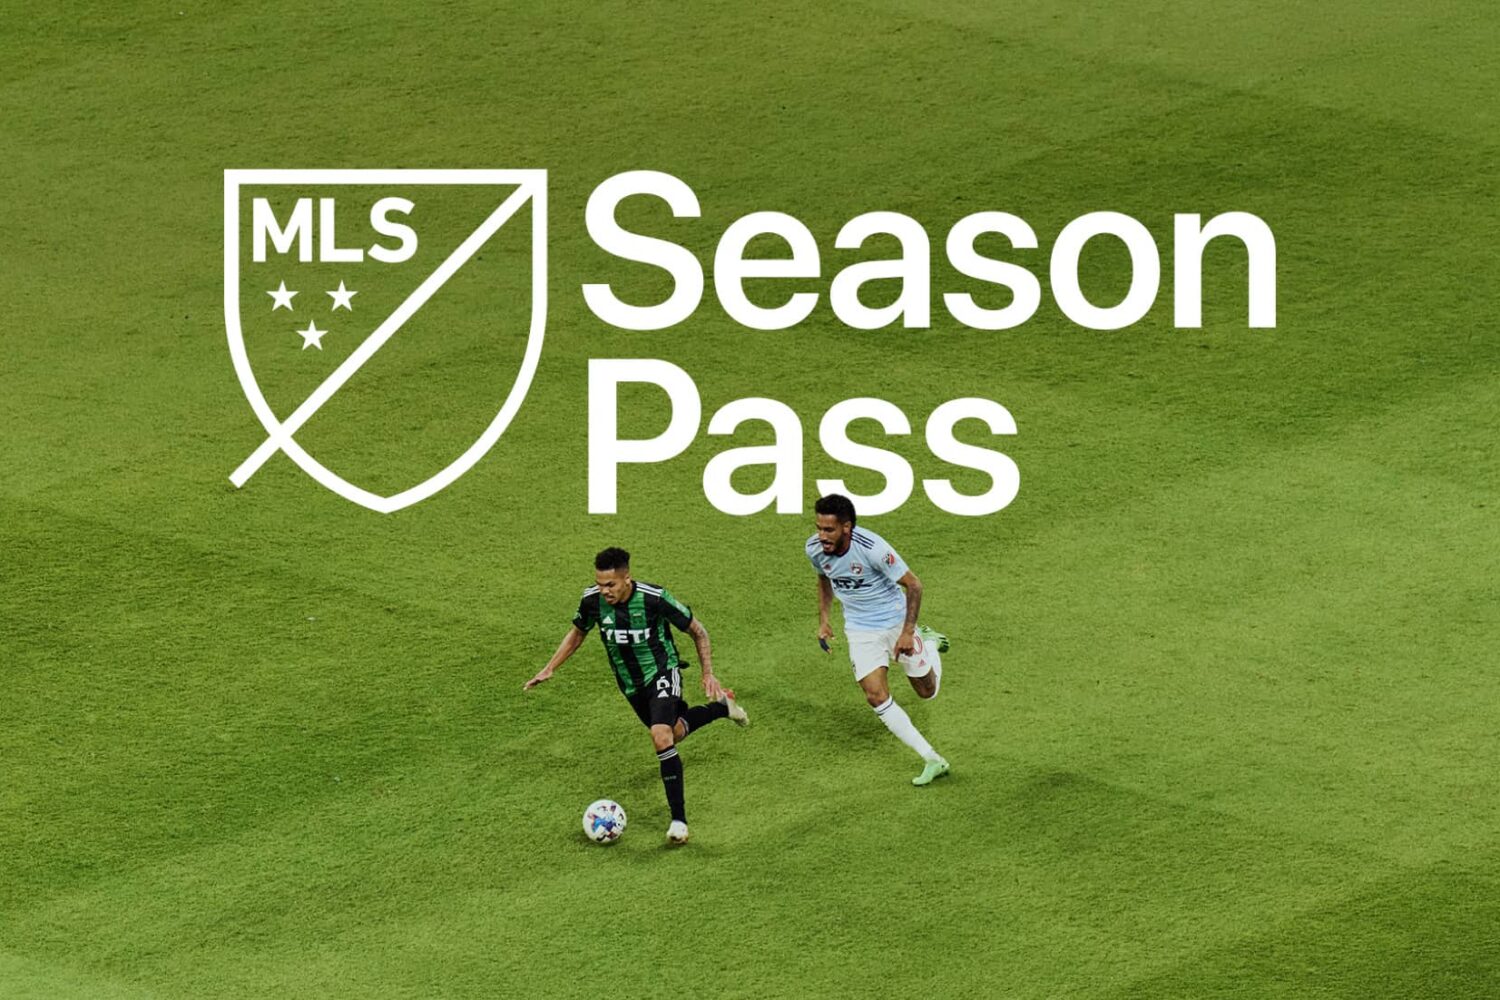 Two soccer players on a field and the "MLAS Season Pass" tagline in white